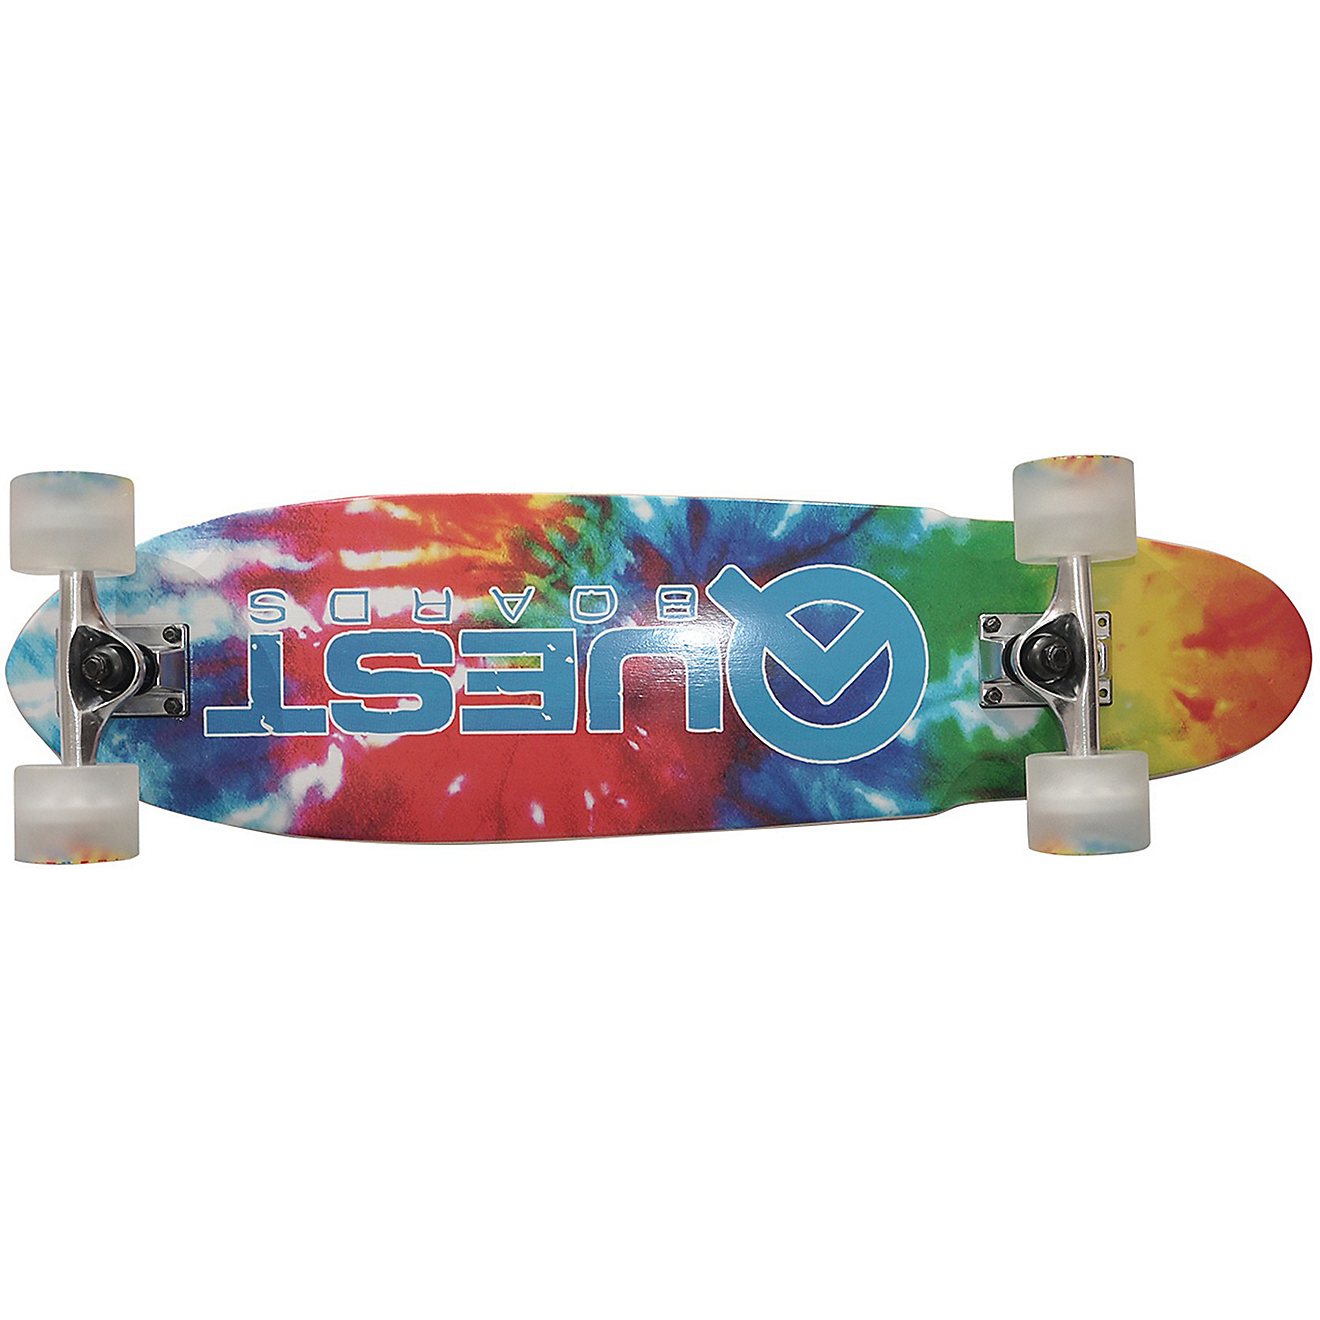 Quest Trippy 30 in Cruiser Longboard                                                                                             - view number 1